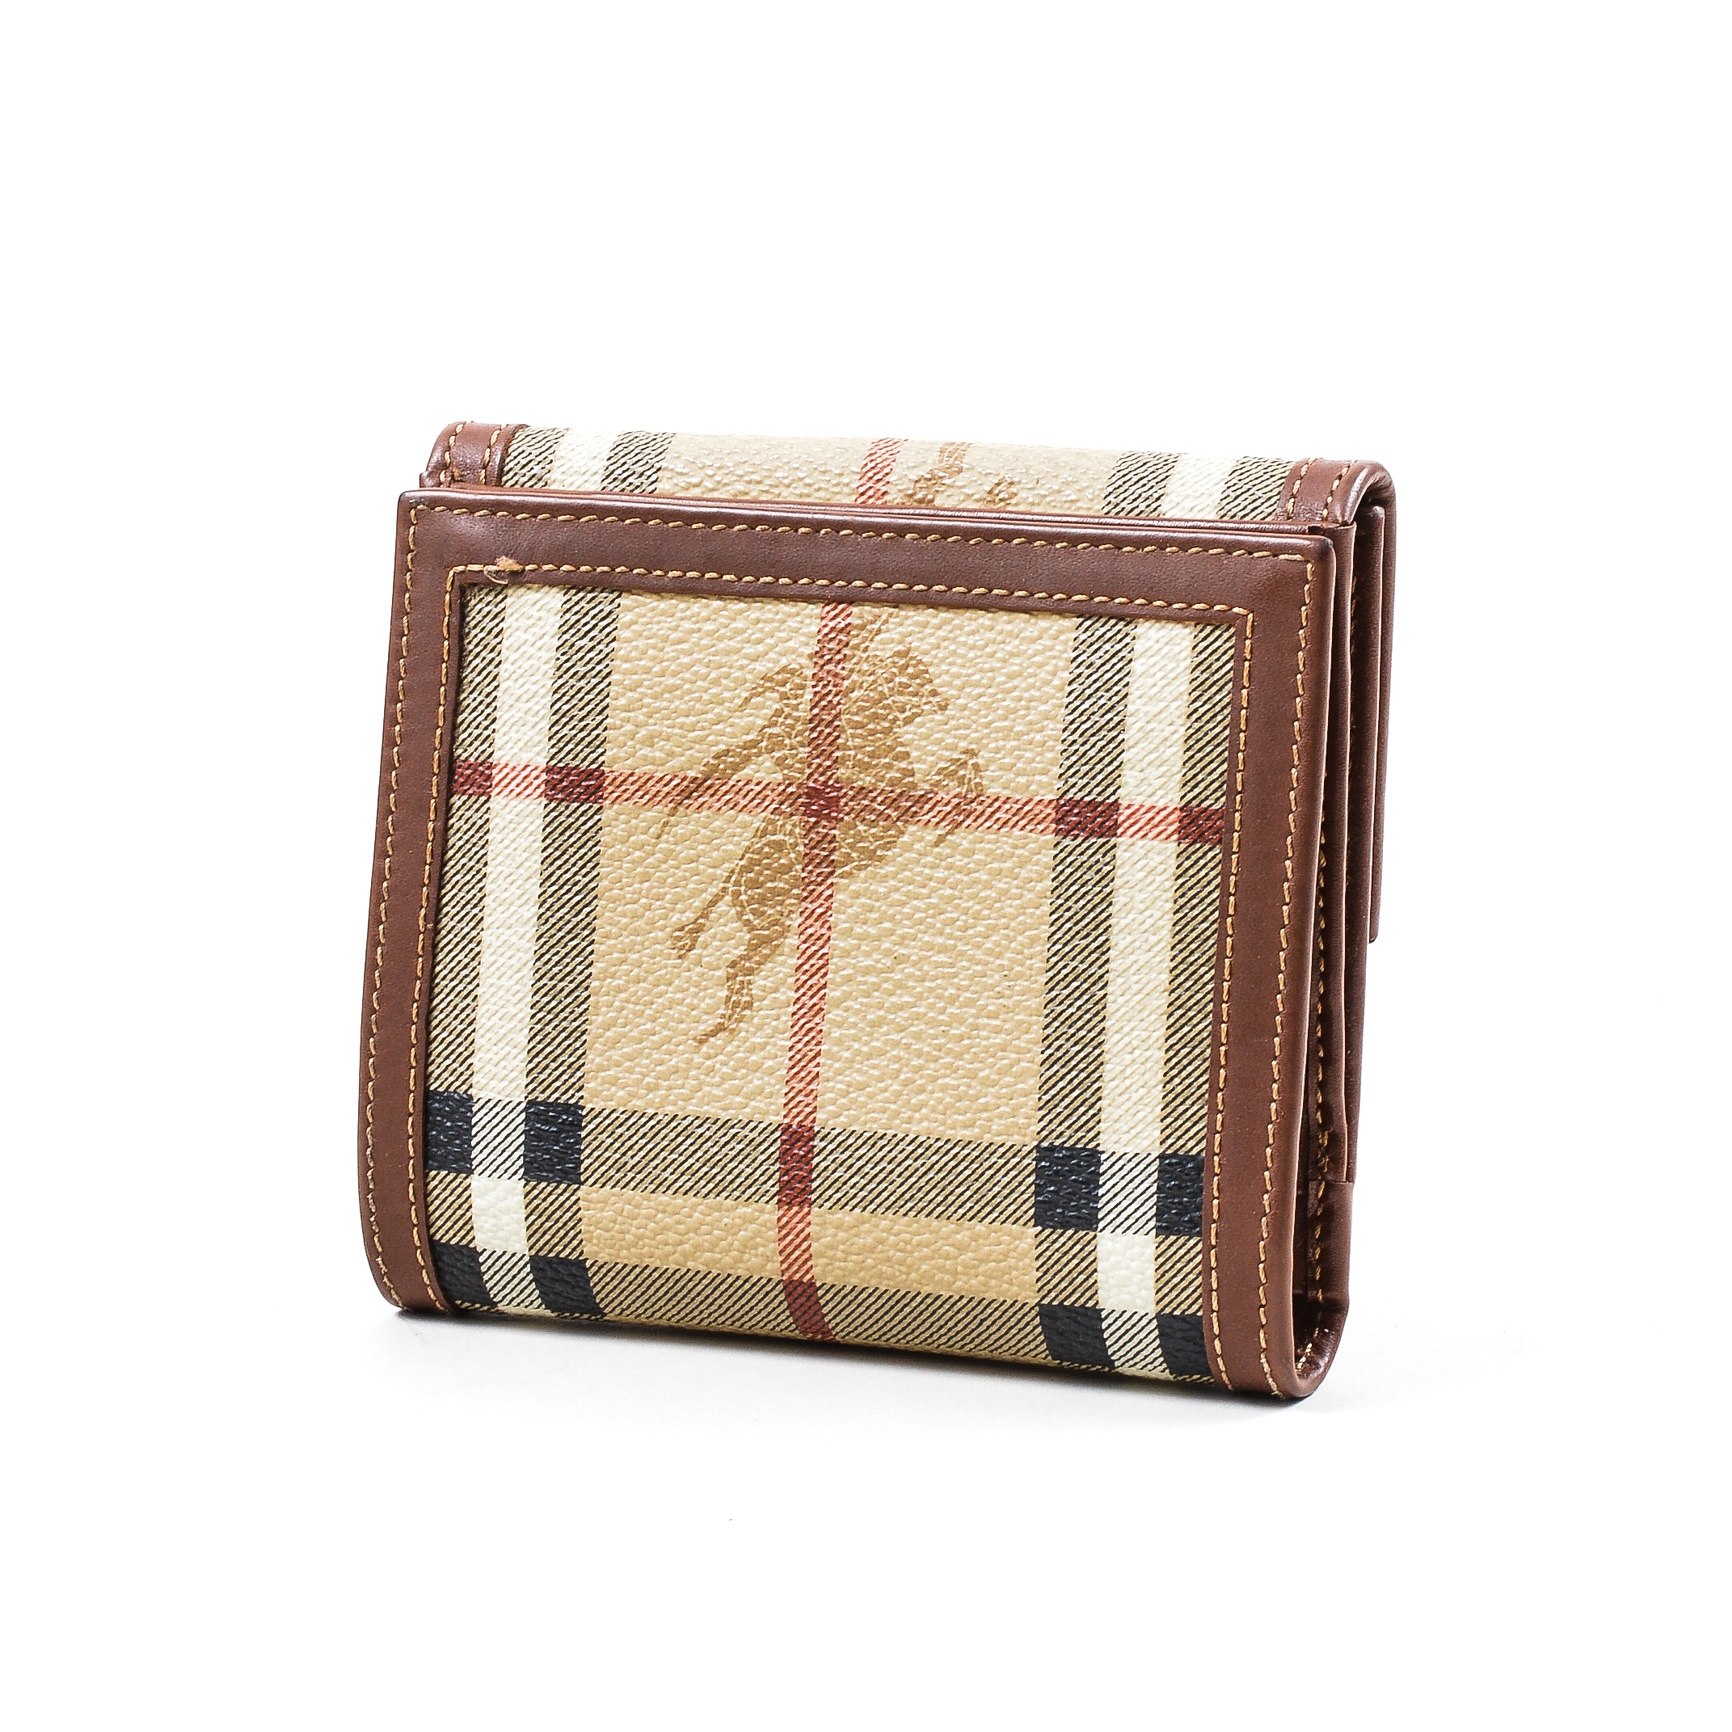 077_Burberry Brown Multicolor Coated Canvas Leather Bifold Wallet.jpg